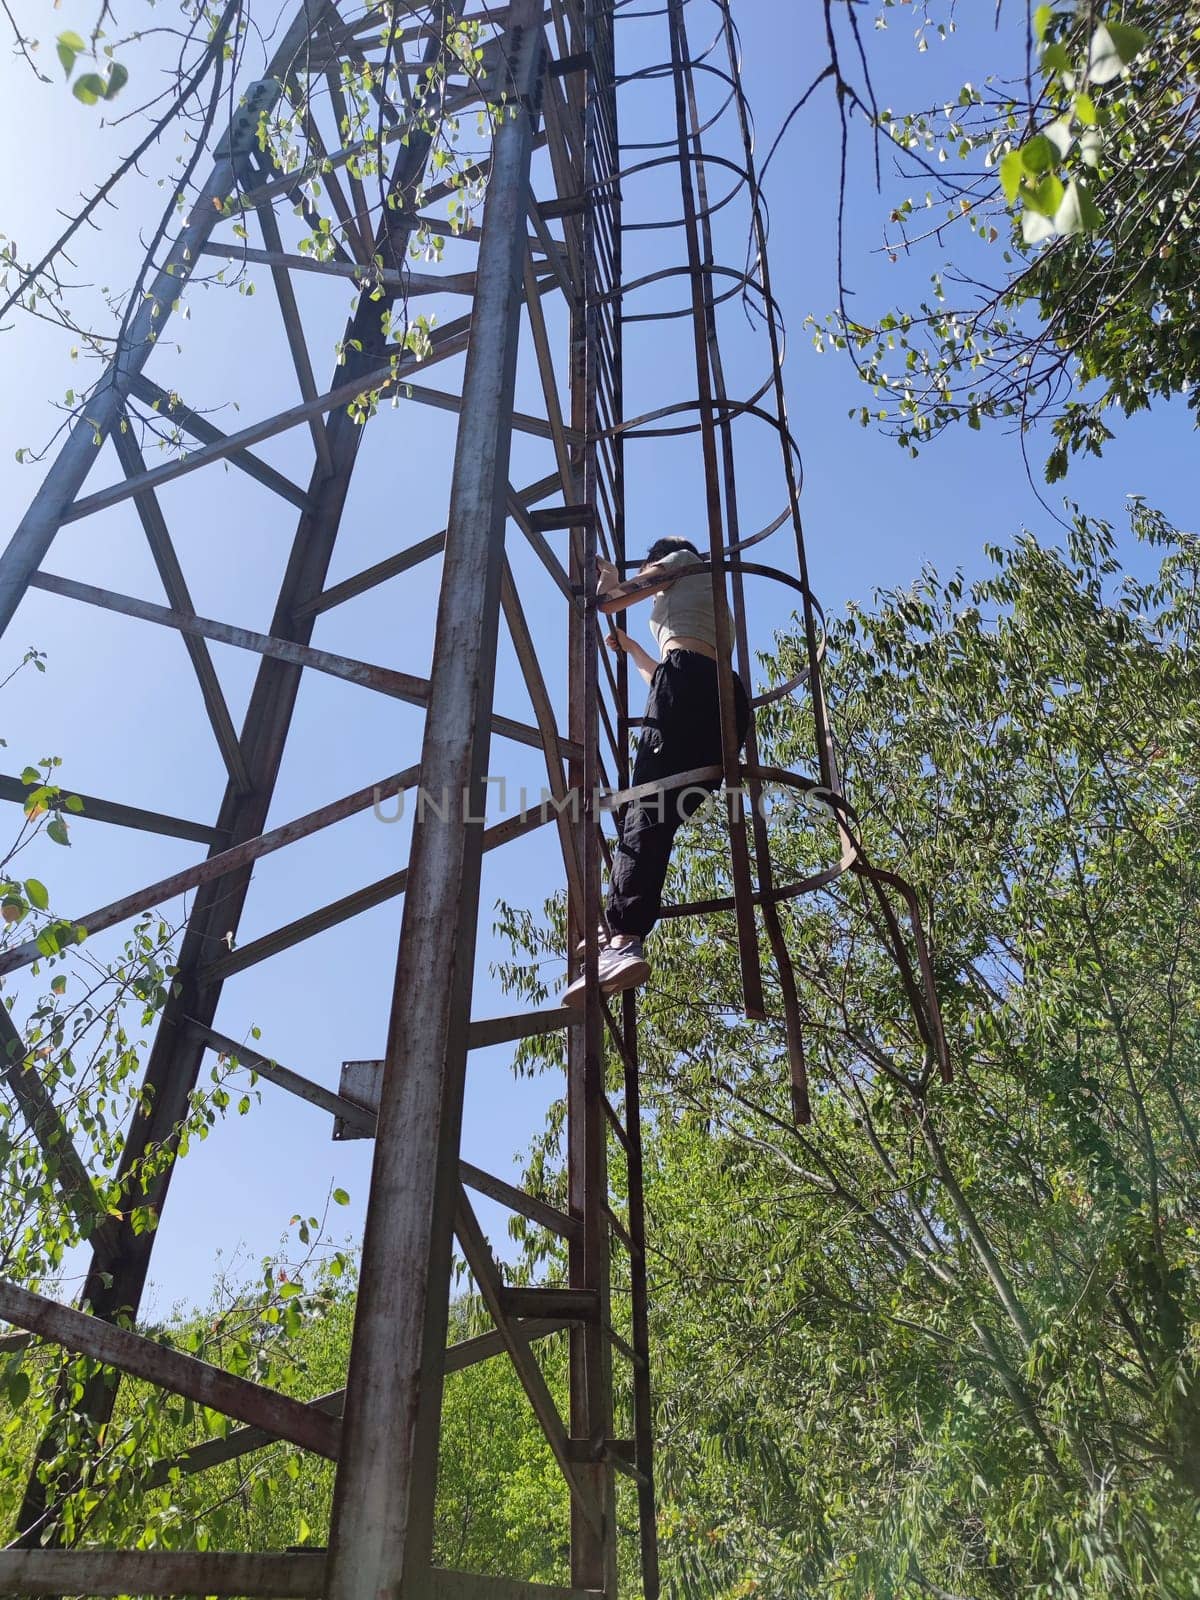 teenage girl climbing without a safety net onto an abandoned rusty metal tower,